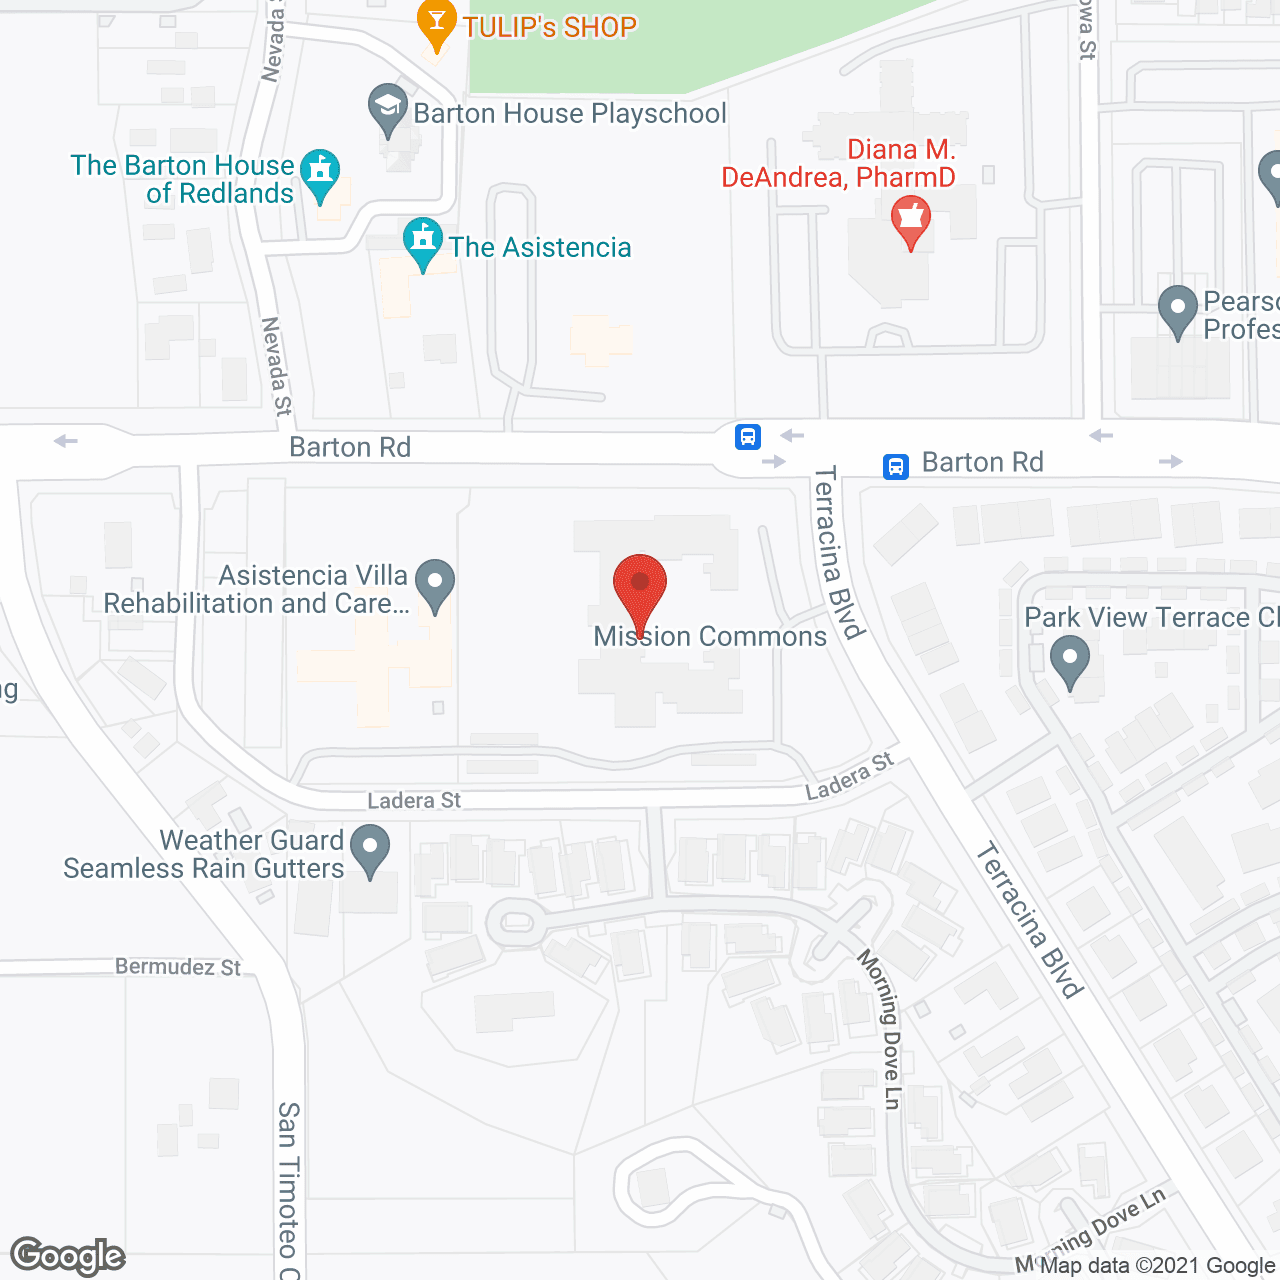 Mission Commons in google map